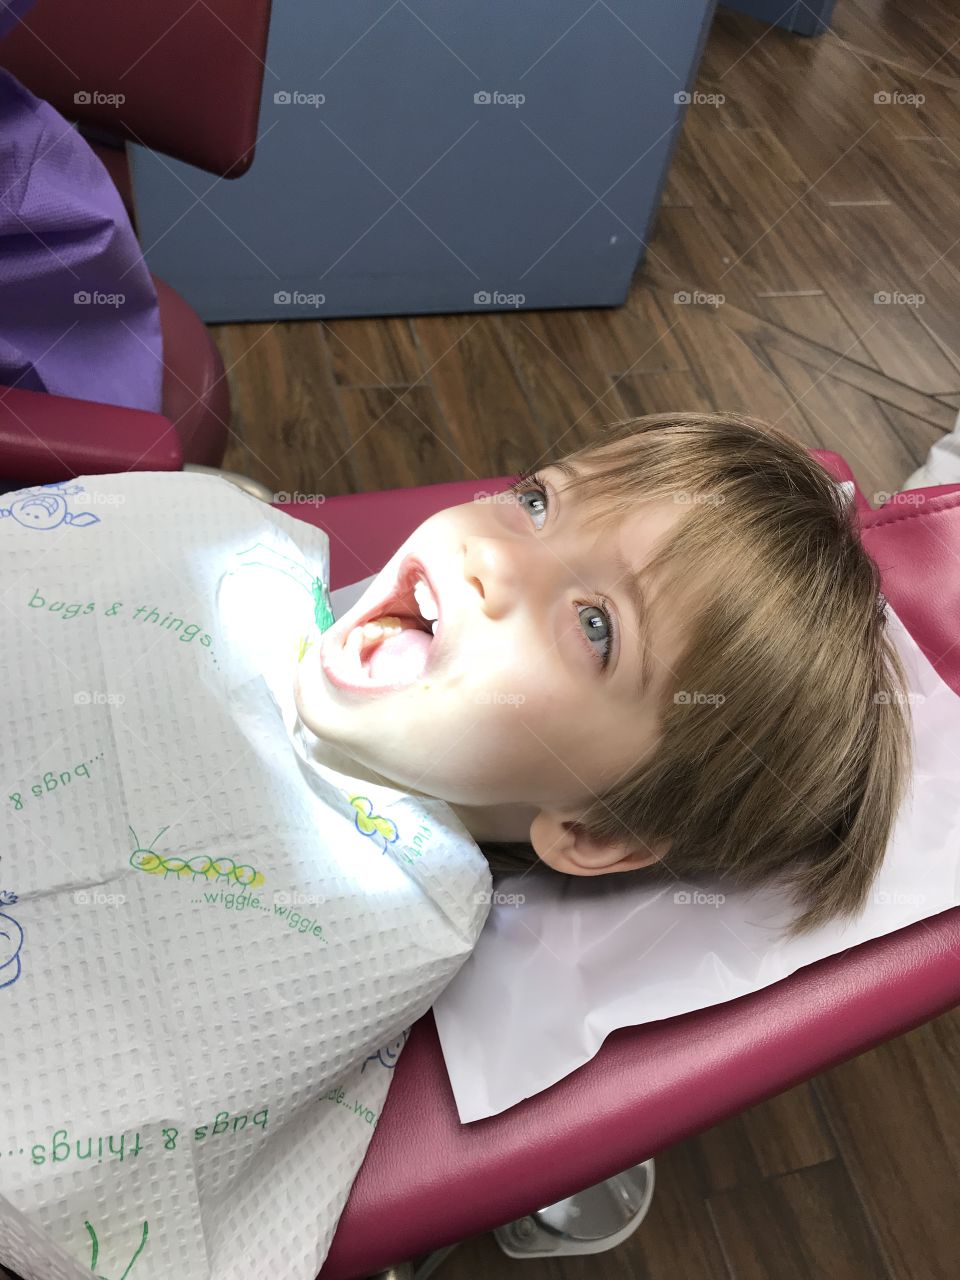 Open wide! February is National Children’s Dental Care month. Hug your fabulous dentist. 